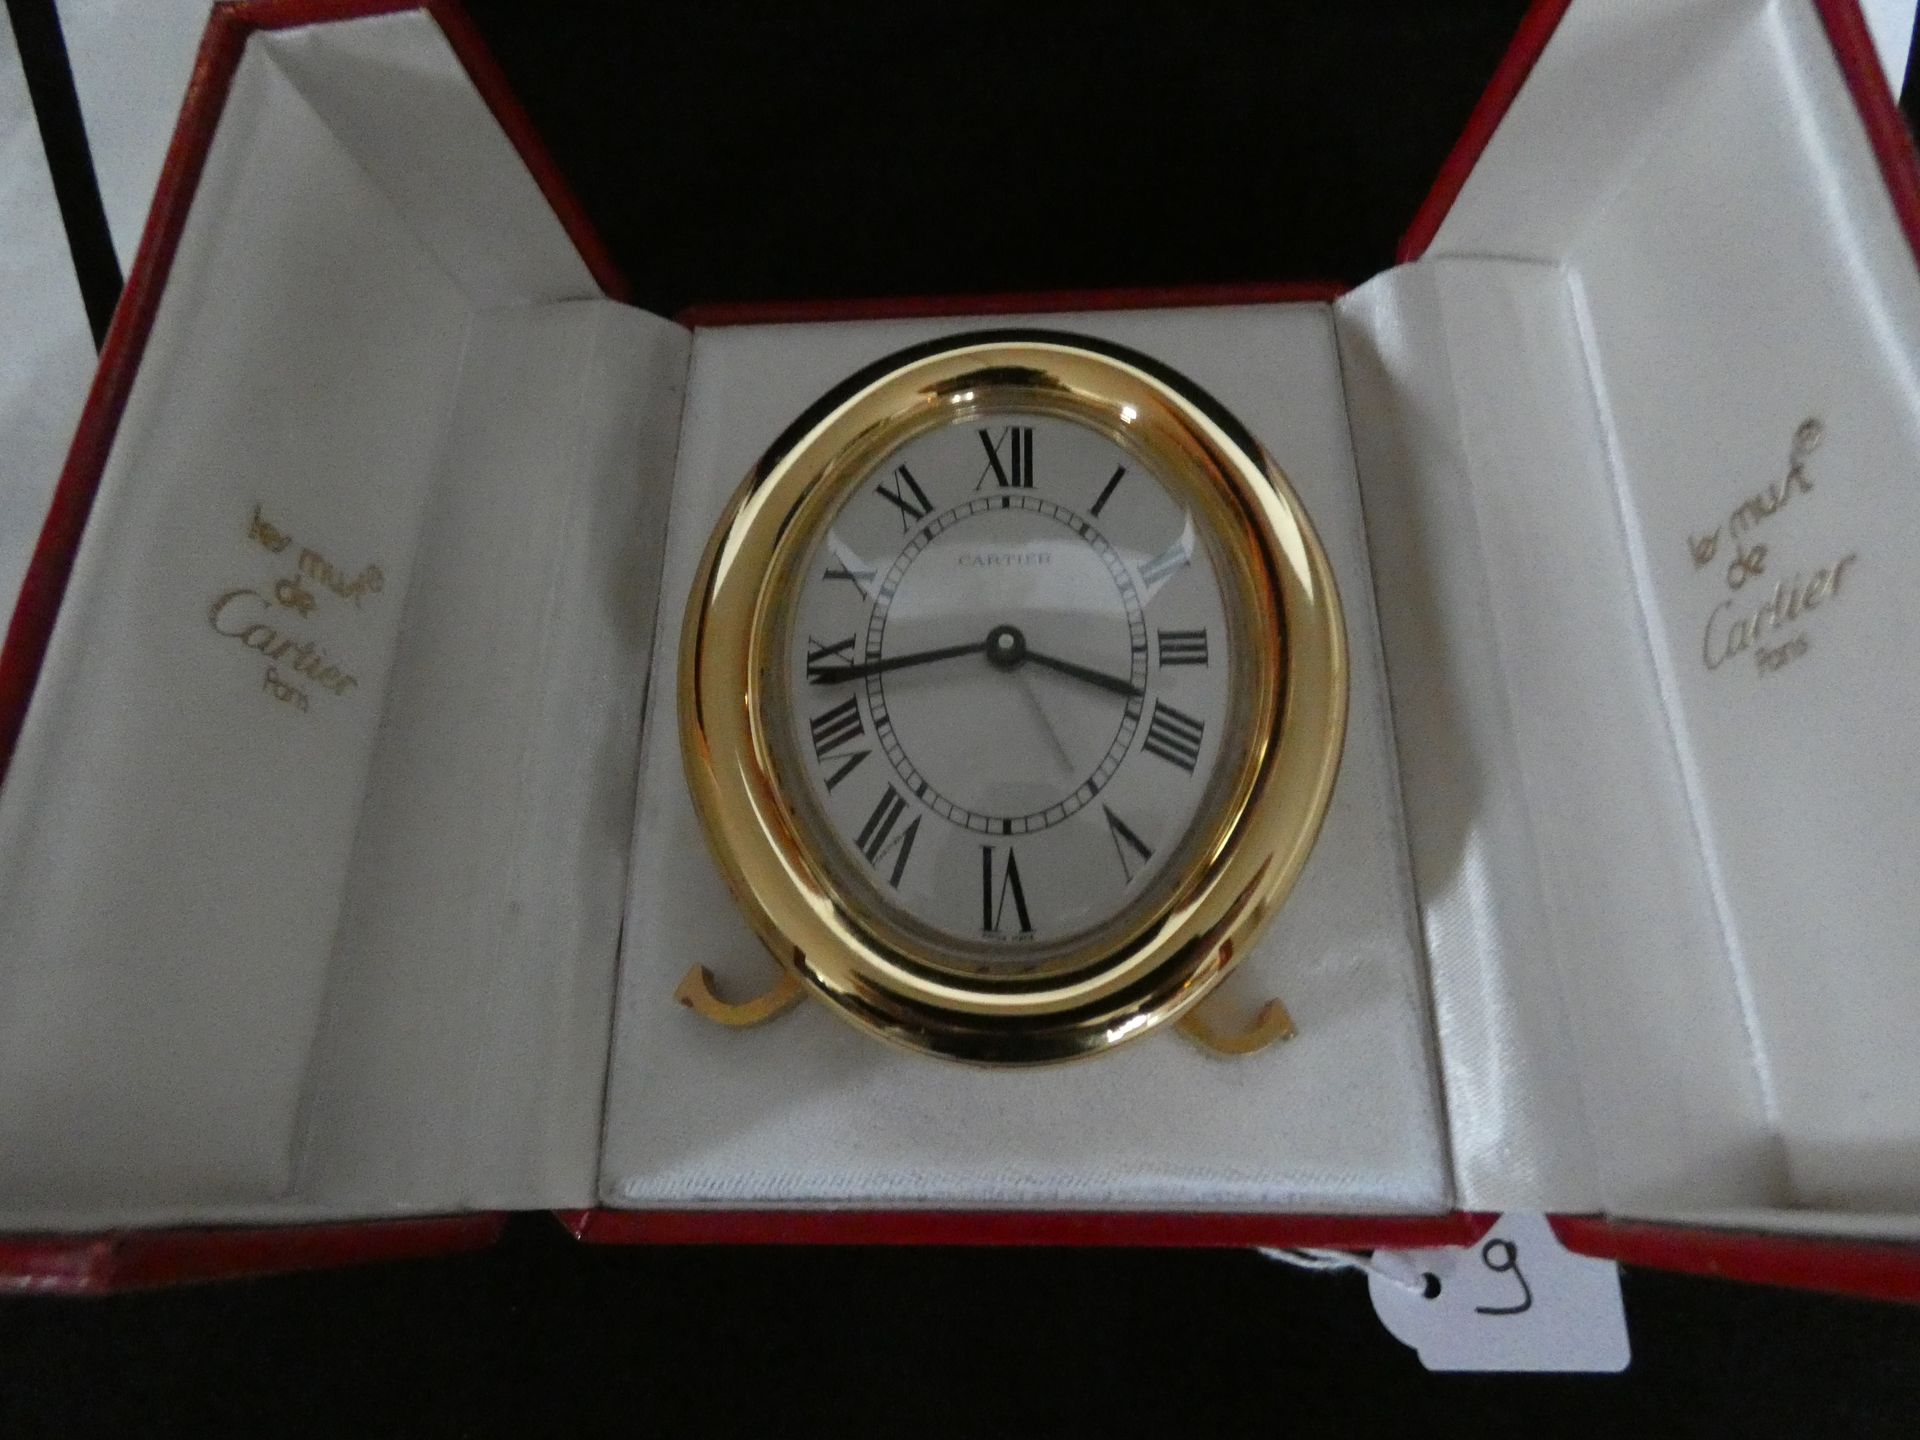 Null 1 CARTIER CLOCK BATHTUB MODEL IN BOX AND GOLD PLATE CERTIFICATE